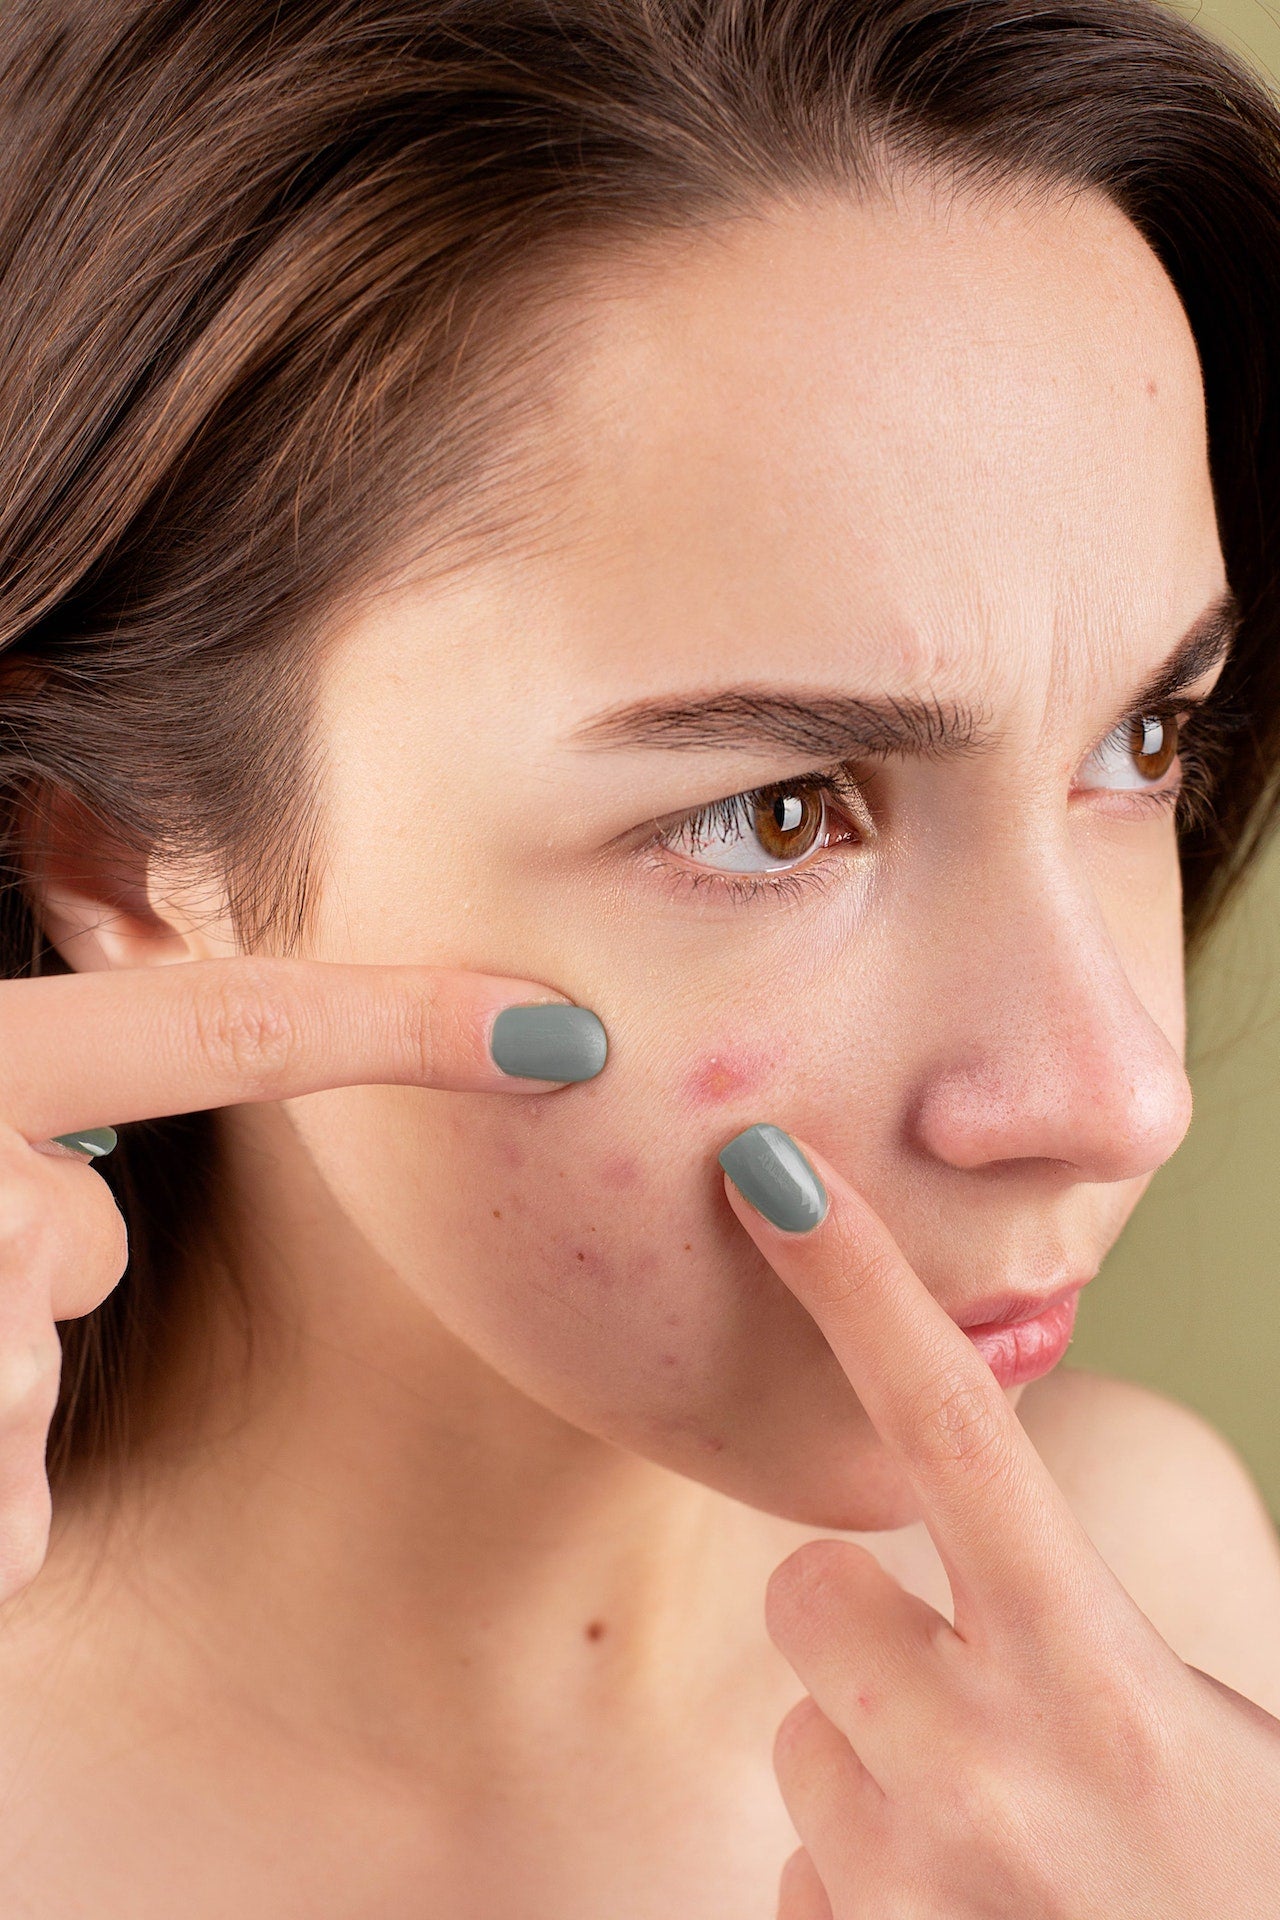 What is acne and how to treat acne scarring?